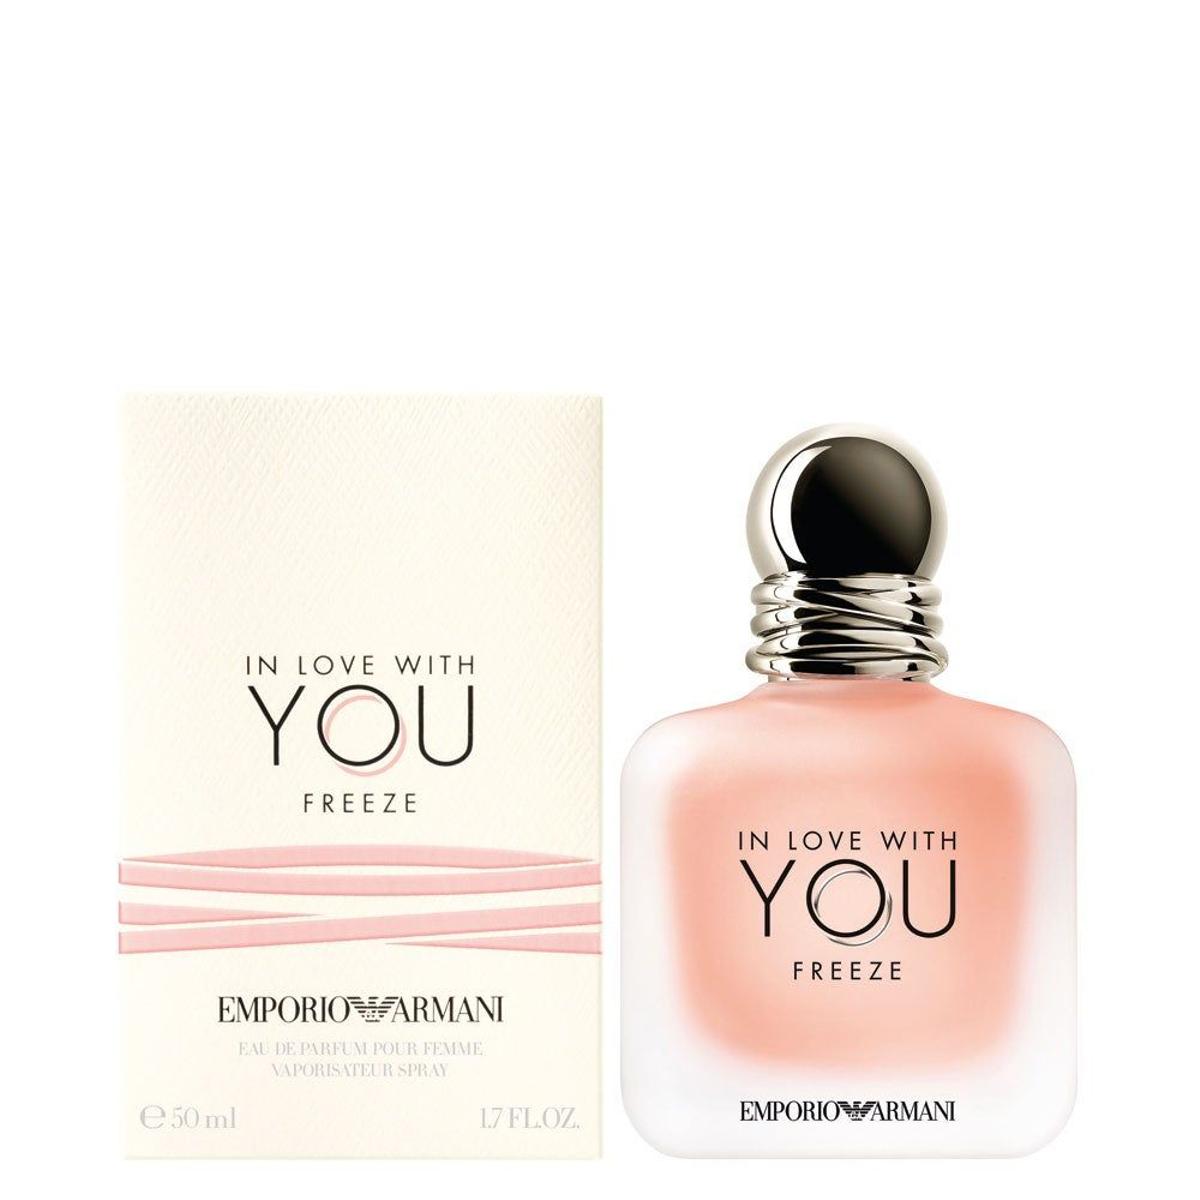 In Love With You Freeze de Emporio Armani